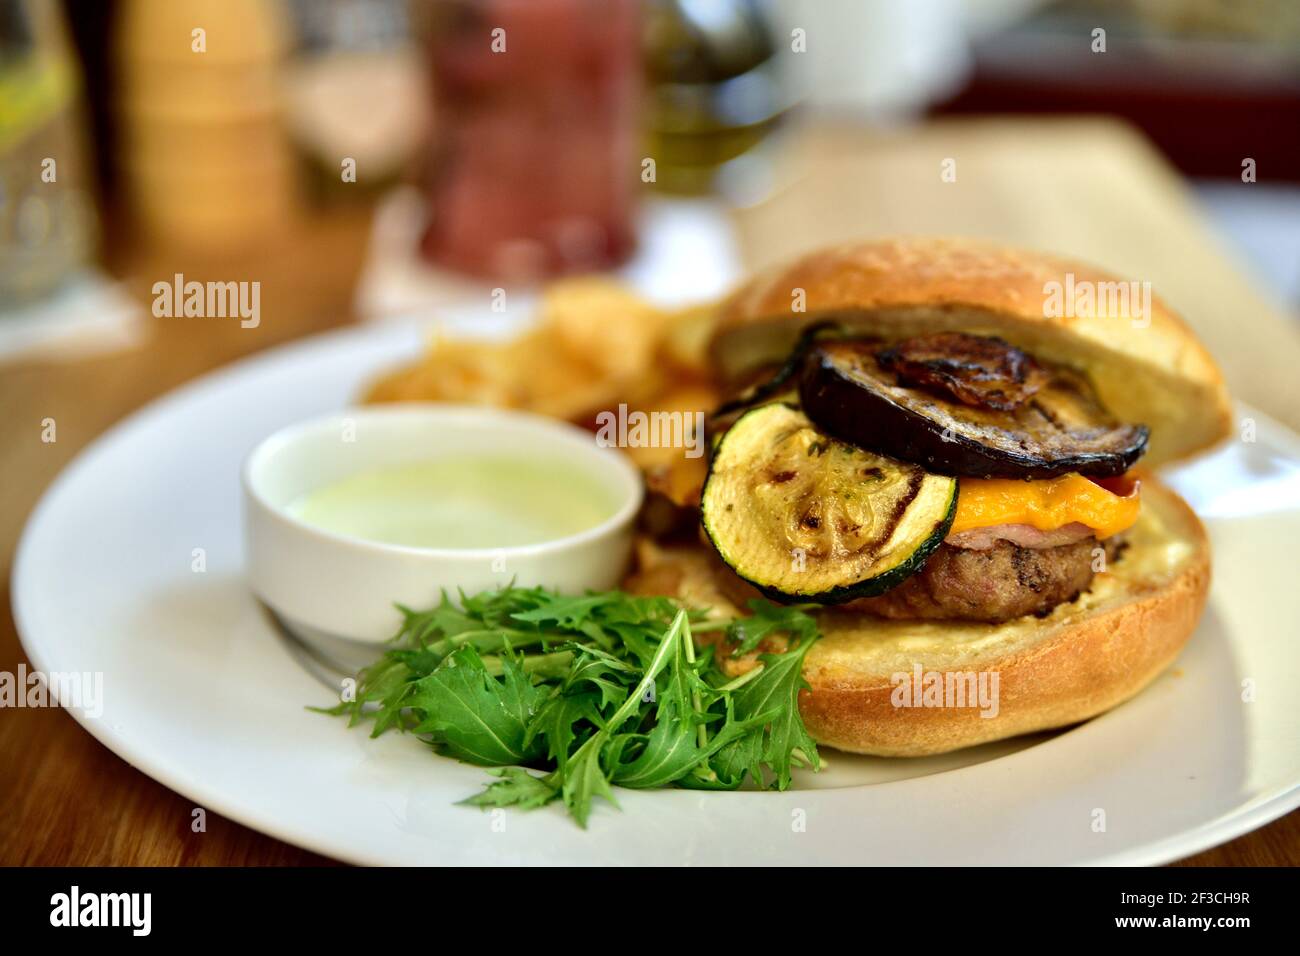 Restaurant food with fresh ingredients - hamburger with cheddar cheese, zucchini, potato slices and tartar sauce Stock Photo